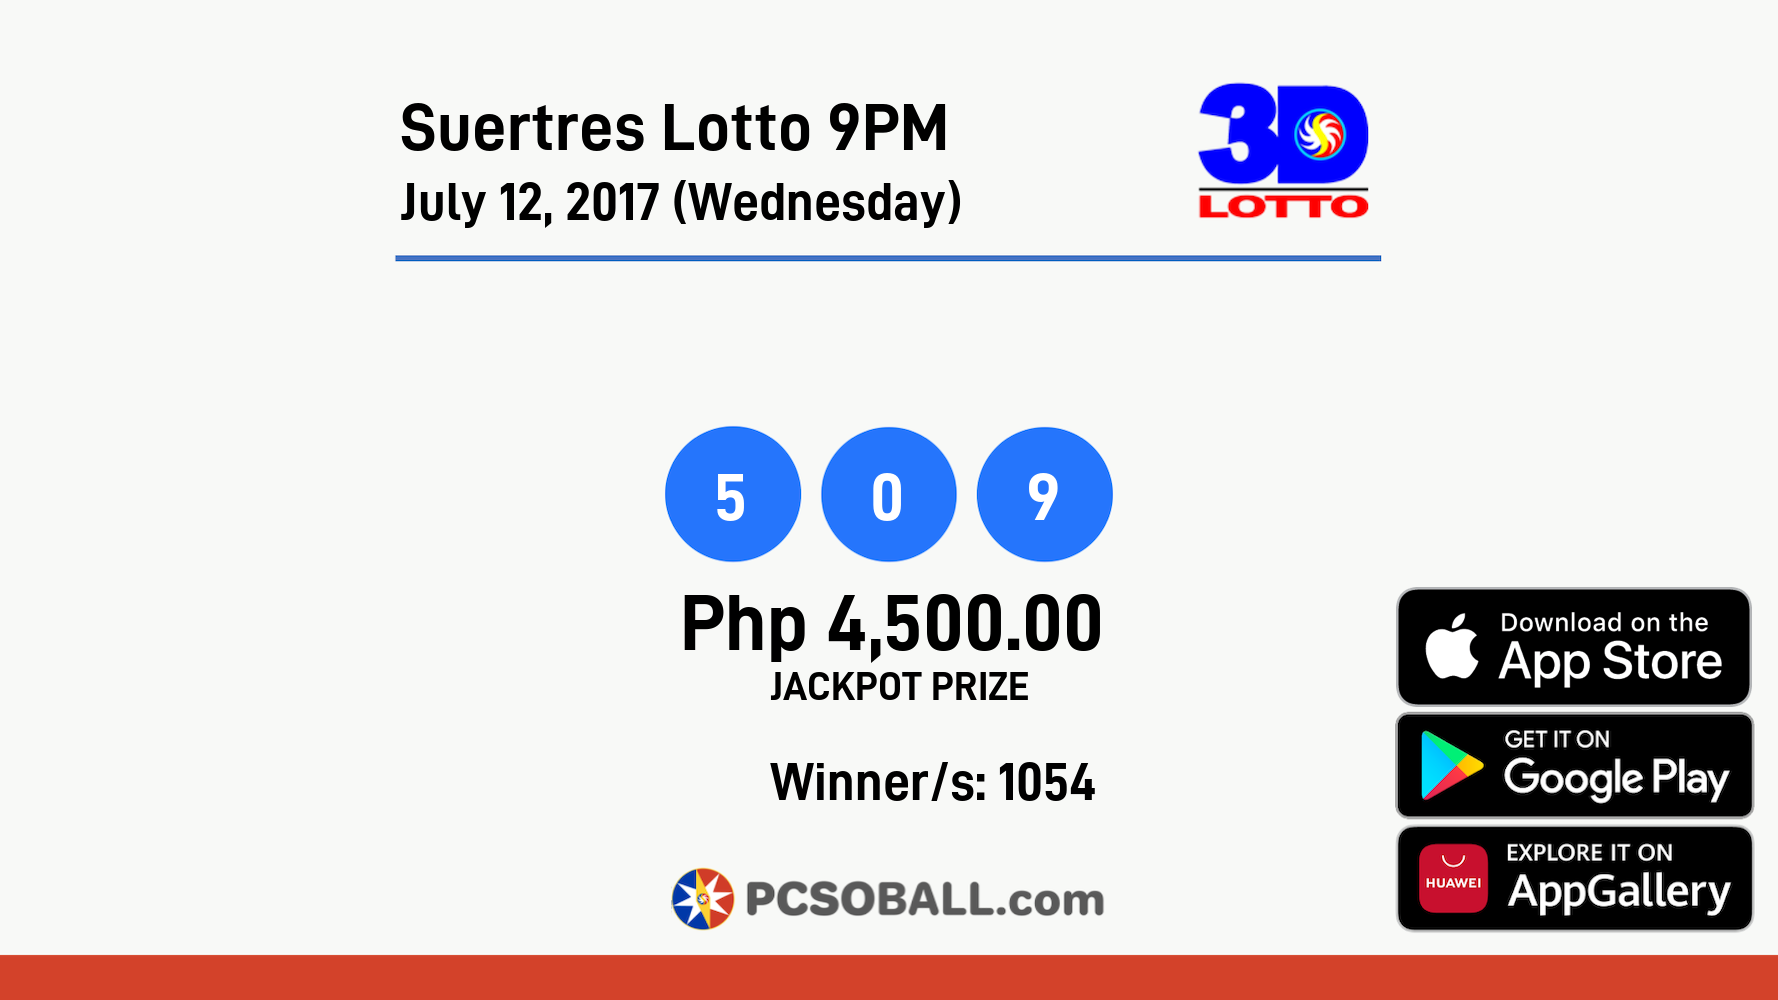 Suertres Lotto 9PM July 12, 2017 (Wednesday) Result